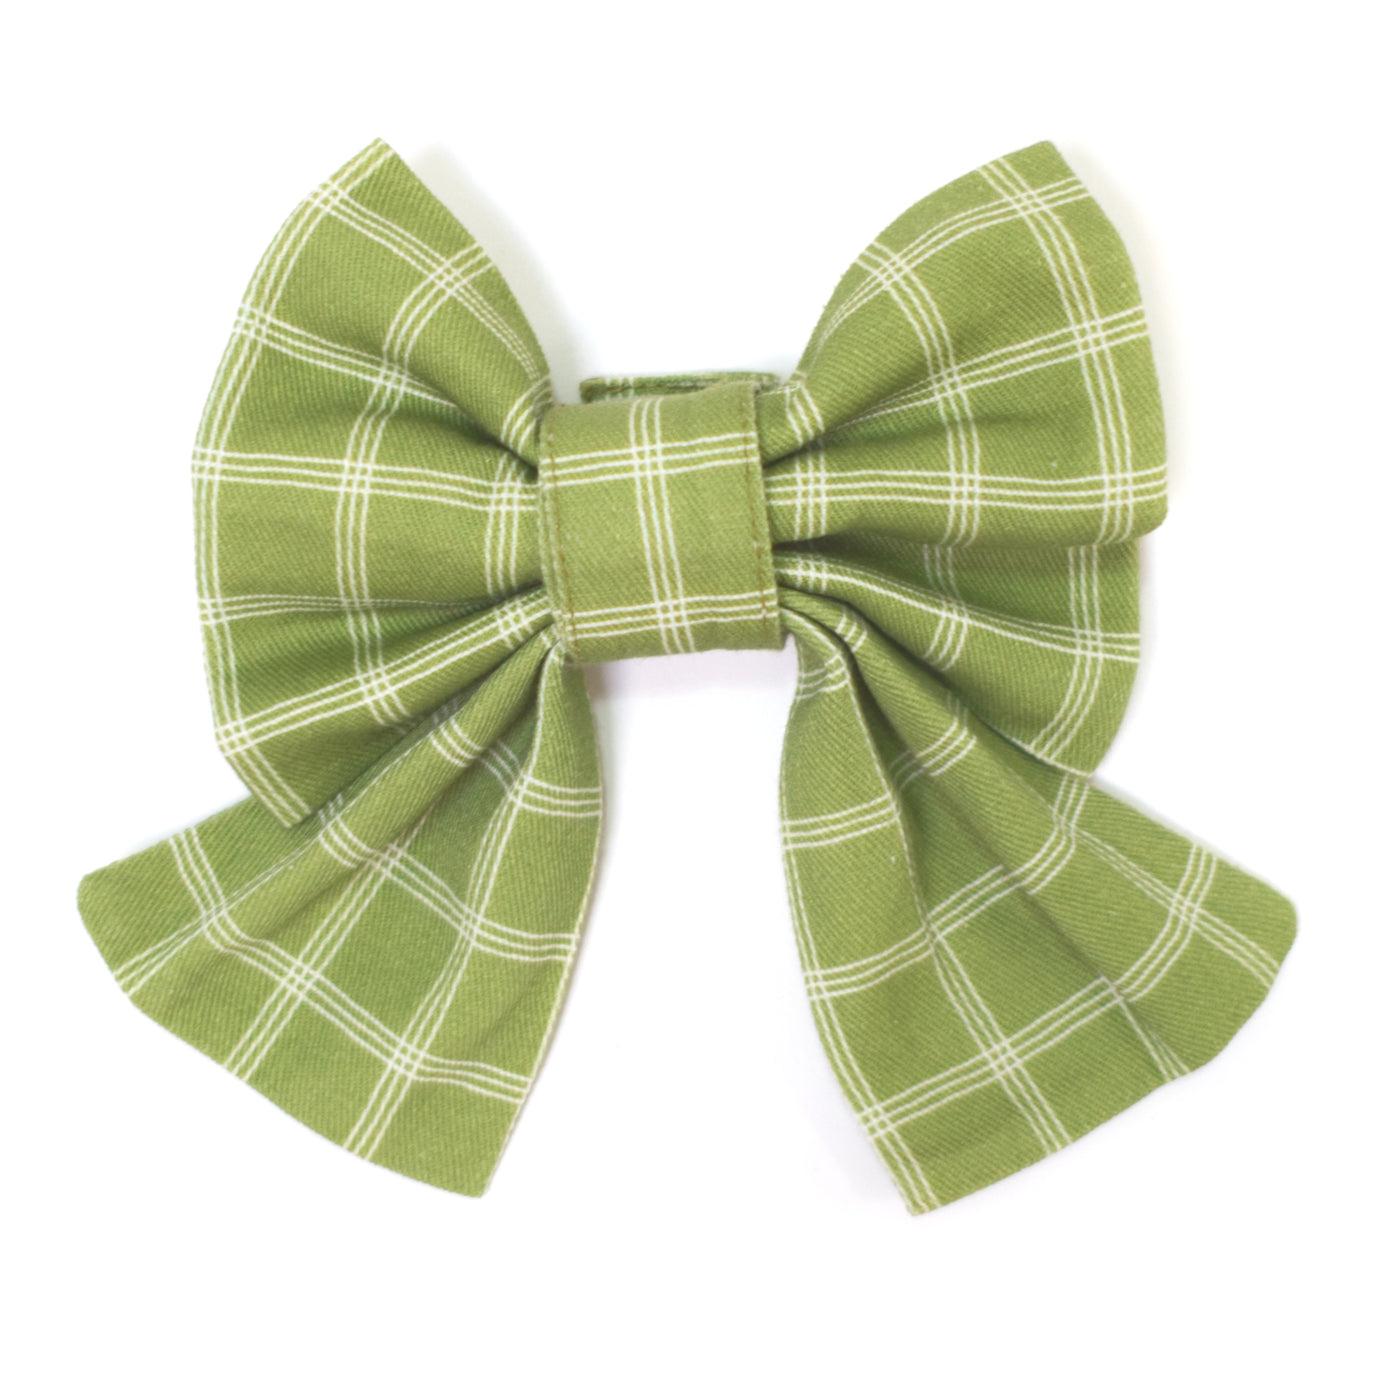 Bright green sailor dog bow for collars or harnesses